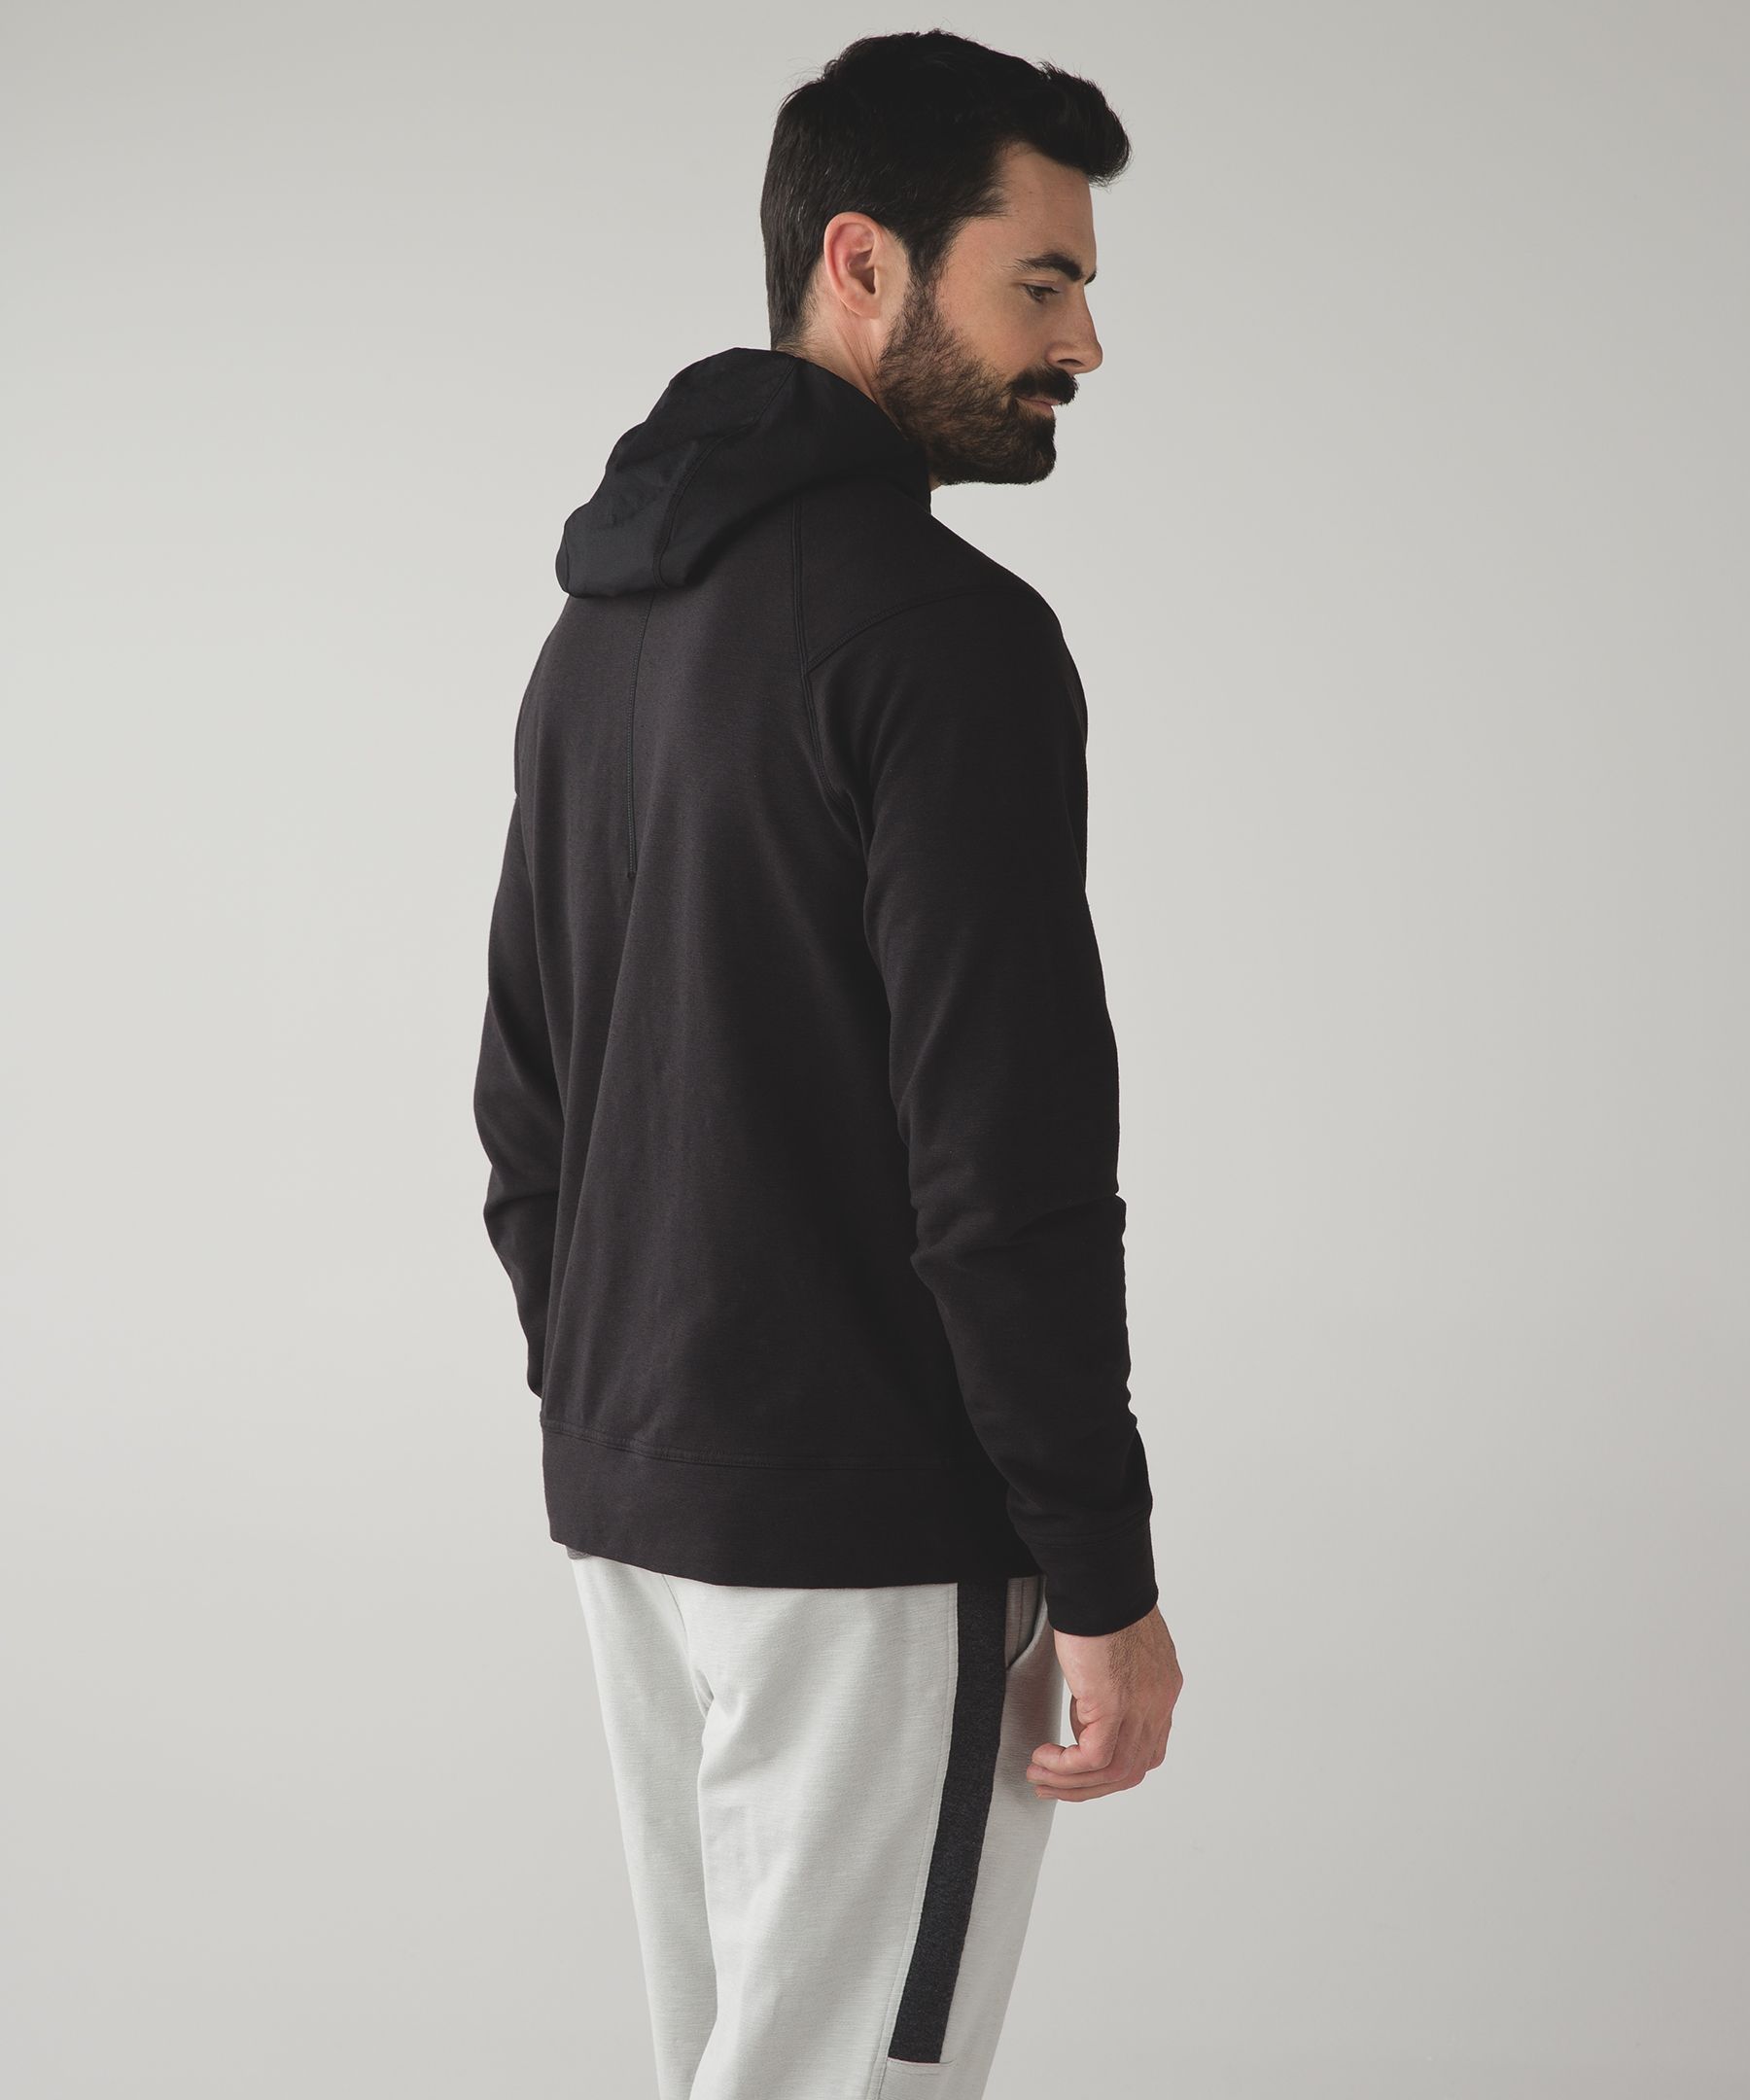 lululemon hoodie: Get the City Sweat pullover for up to 58% off